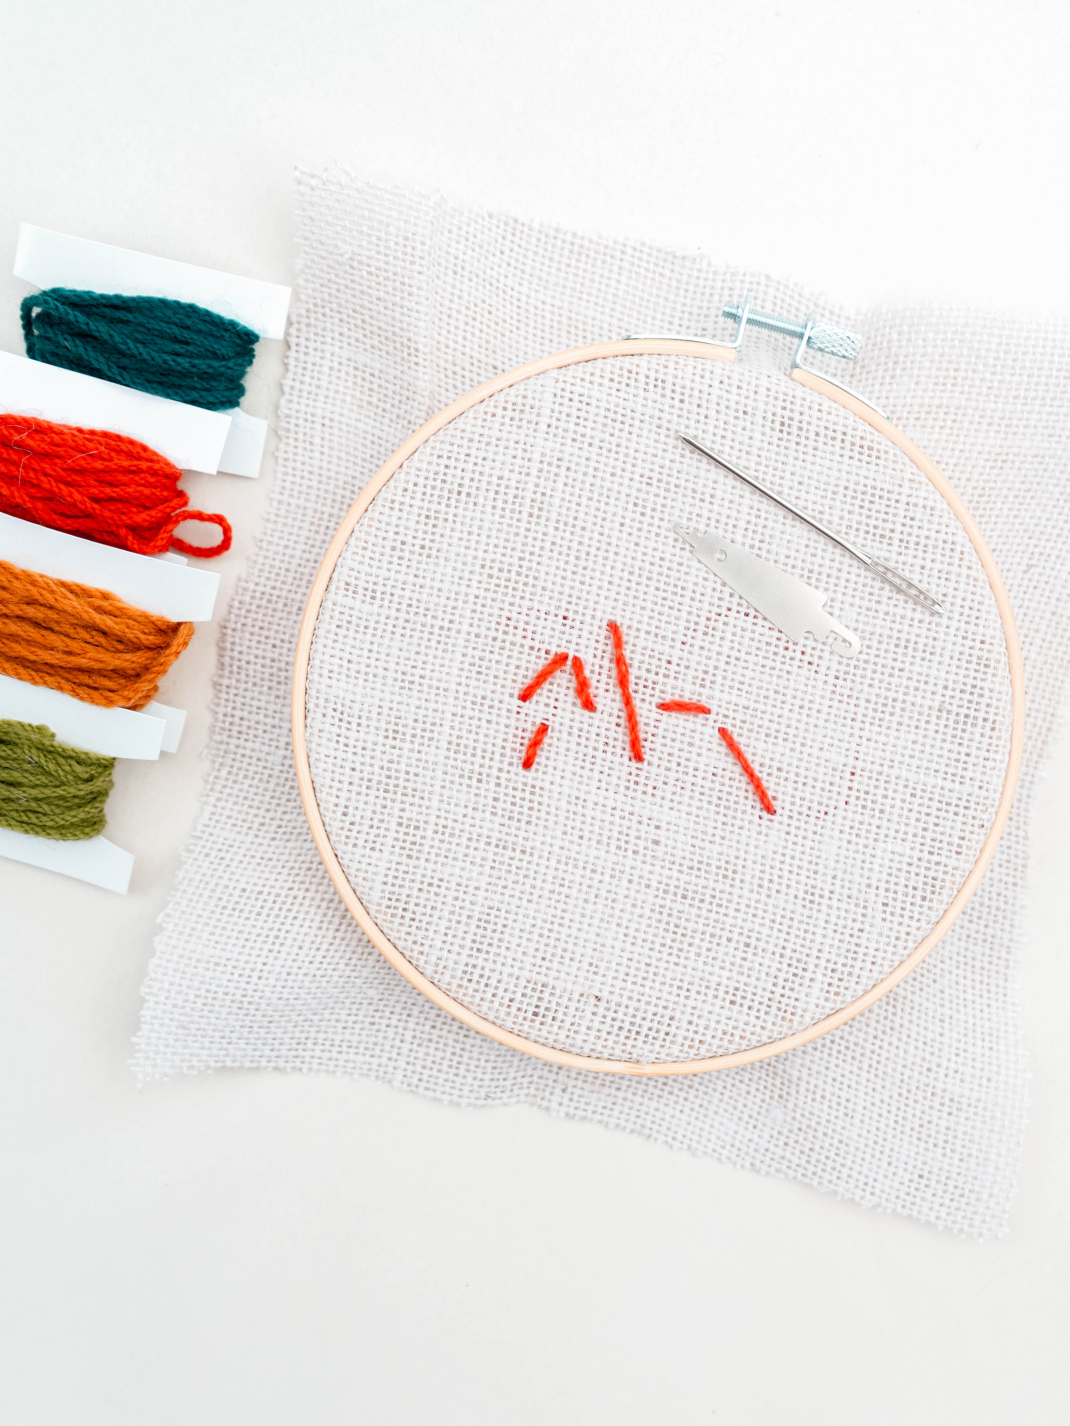 First Embroidery Kit